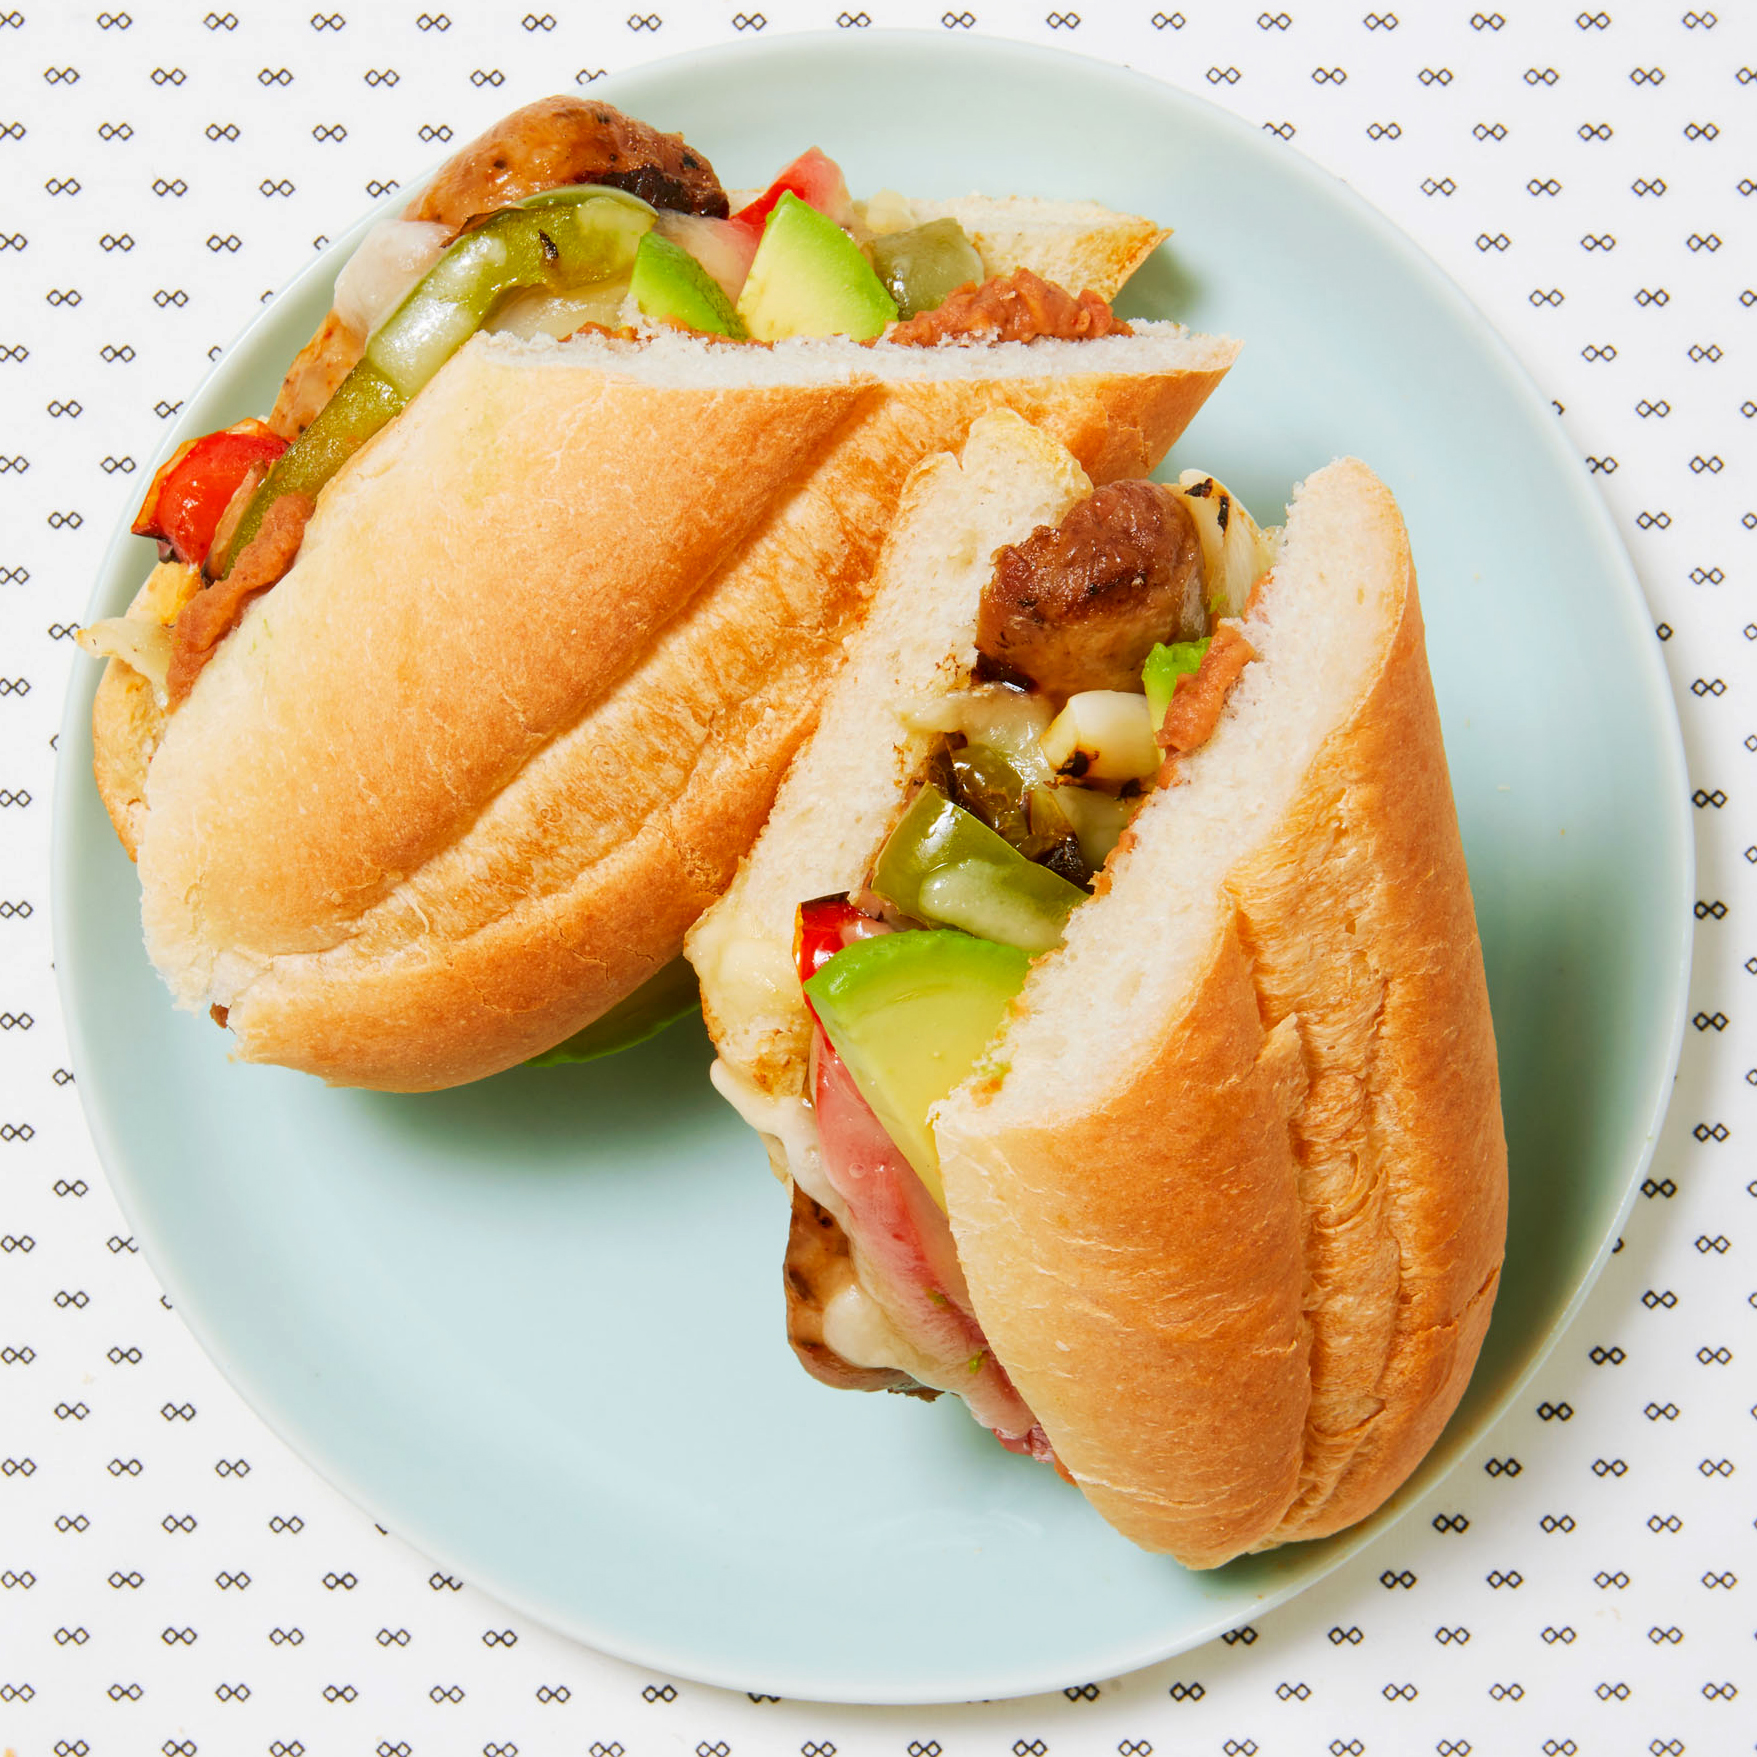 Mexican-Style Sausage Sandwiches